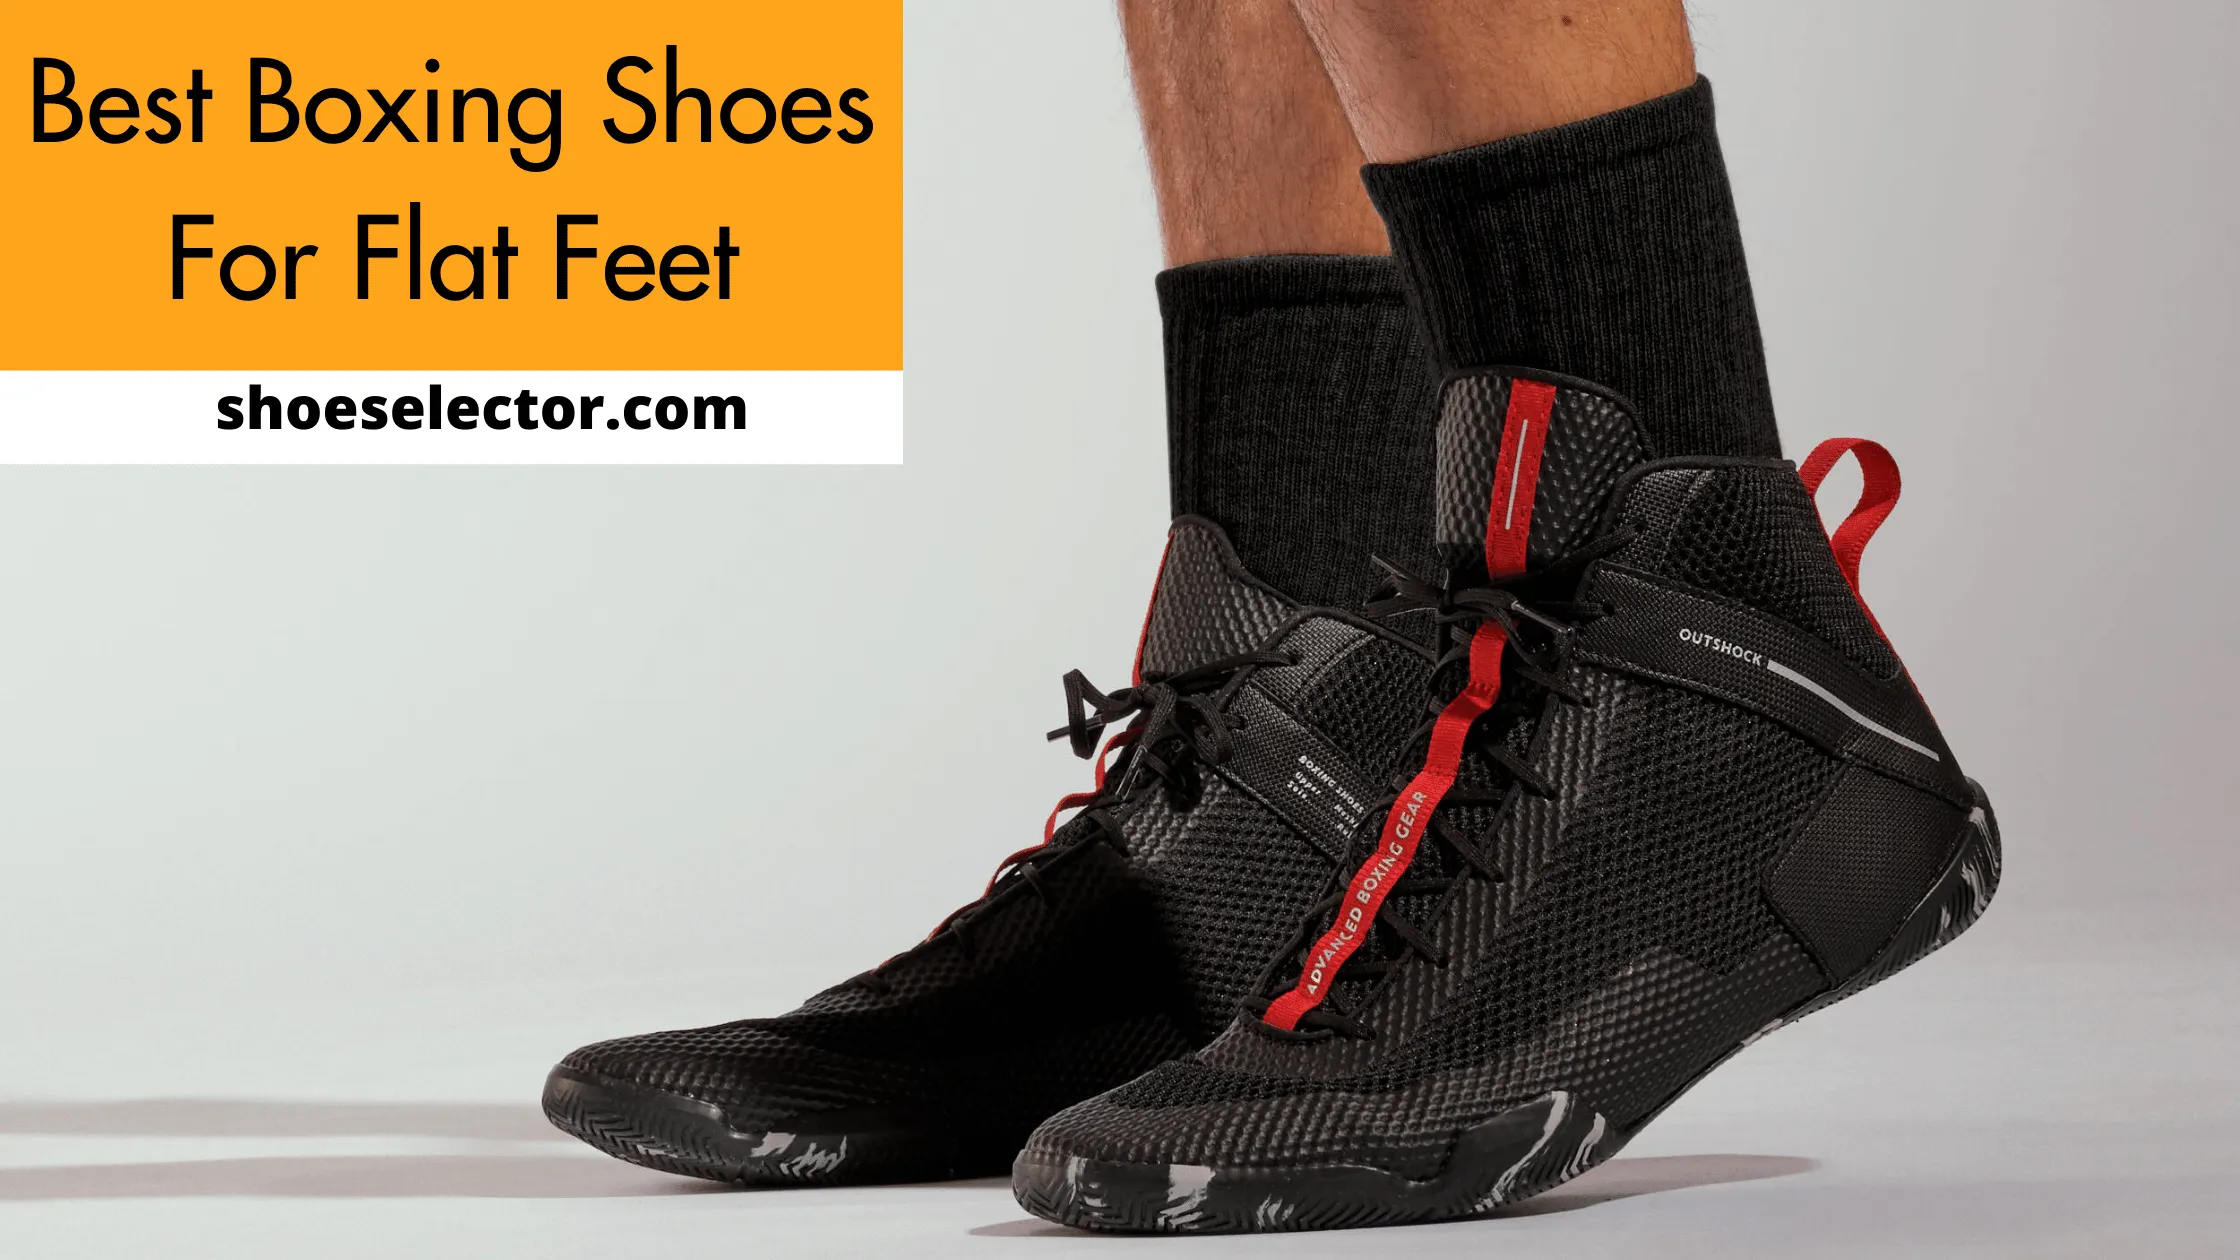 Best Boxing Shoes For Flat Feet - Comprehensive Guide